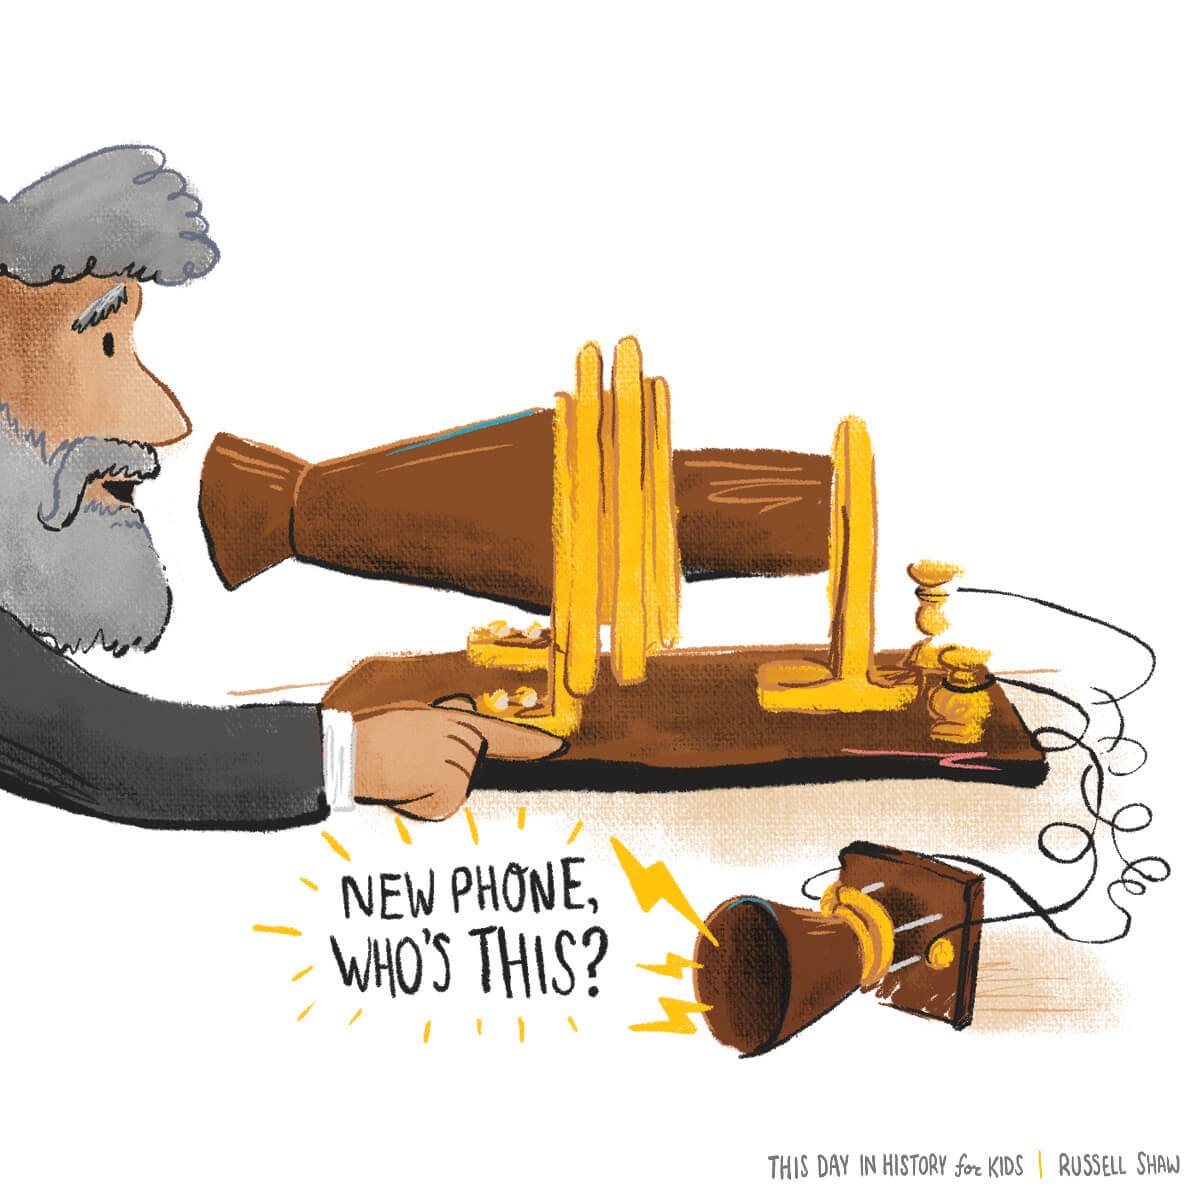  A whimsical illustration of alexander graham bell with an early telephone model, accompanied by a humorous modern-day text slang caption "new phone, who's this?" highlighting the contrast between historical communication technology and contemporary 